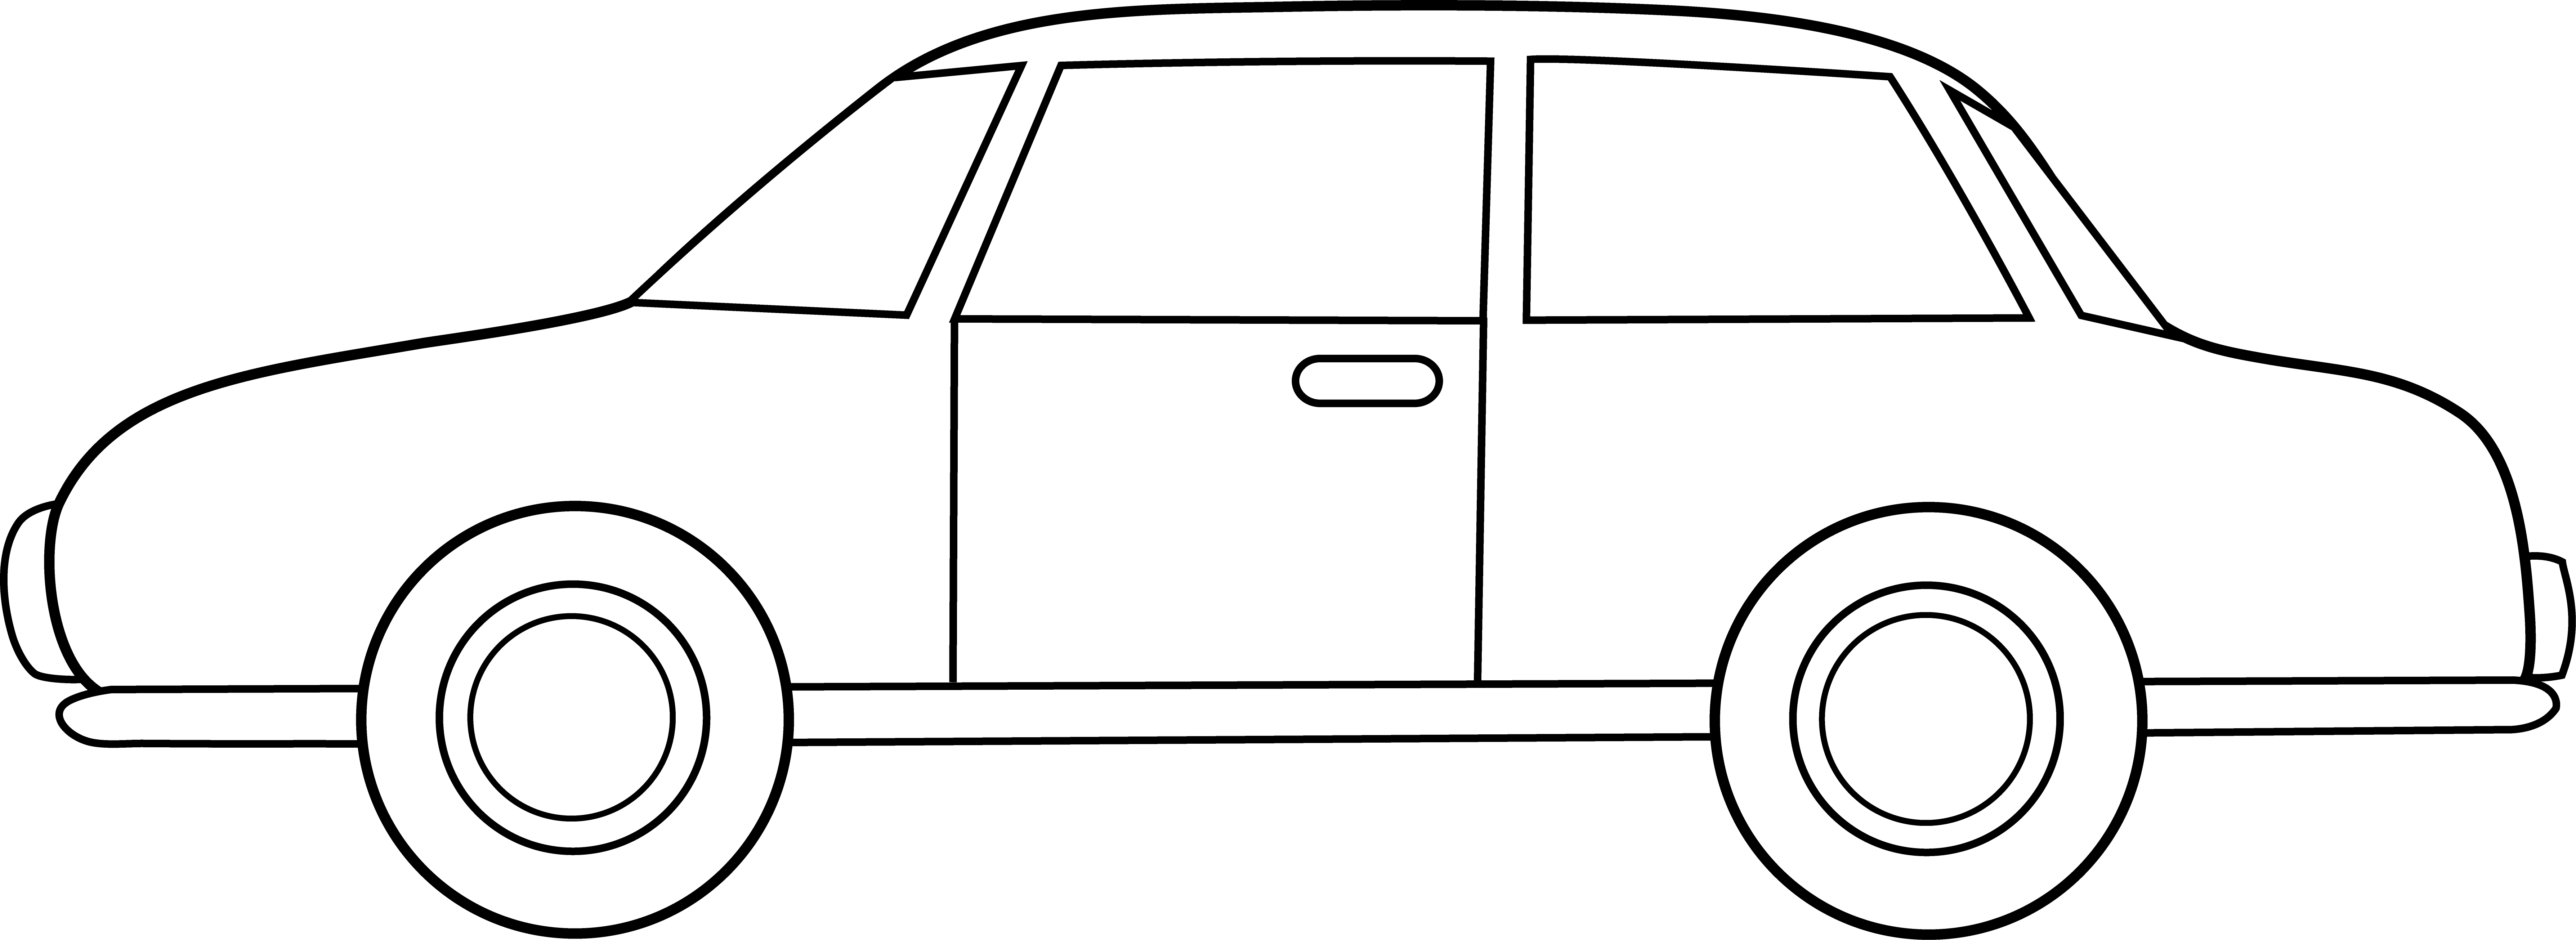 jeep clipart simple